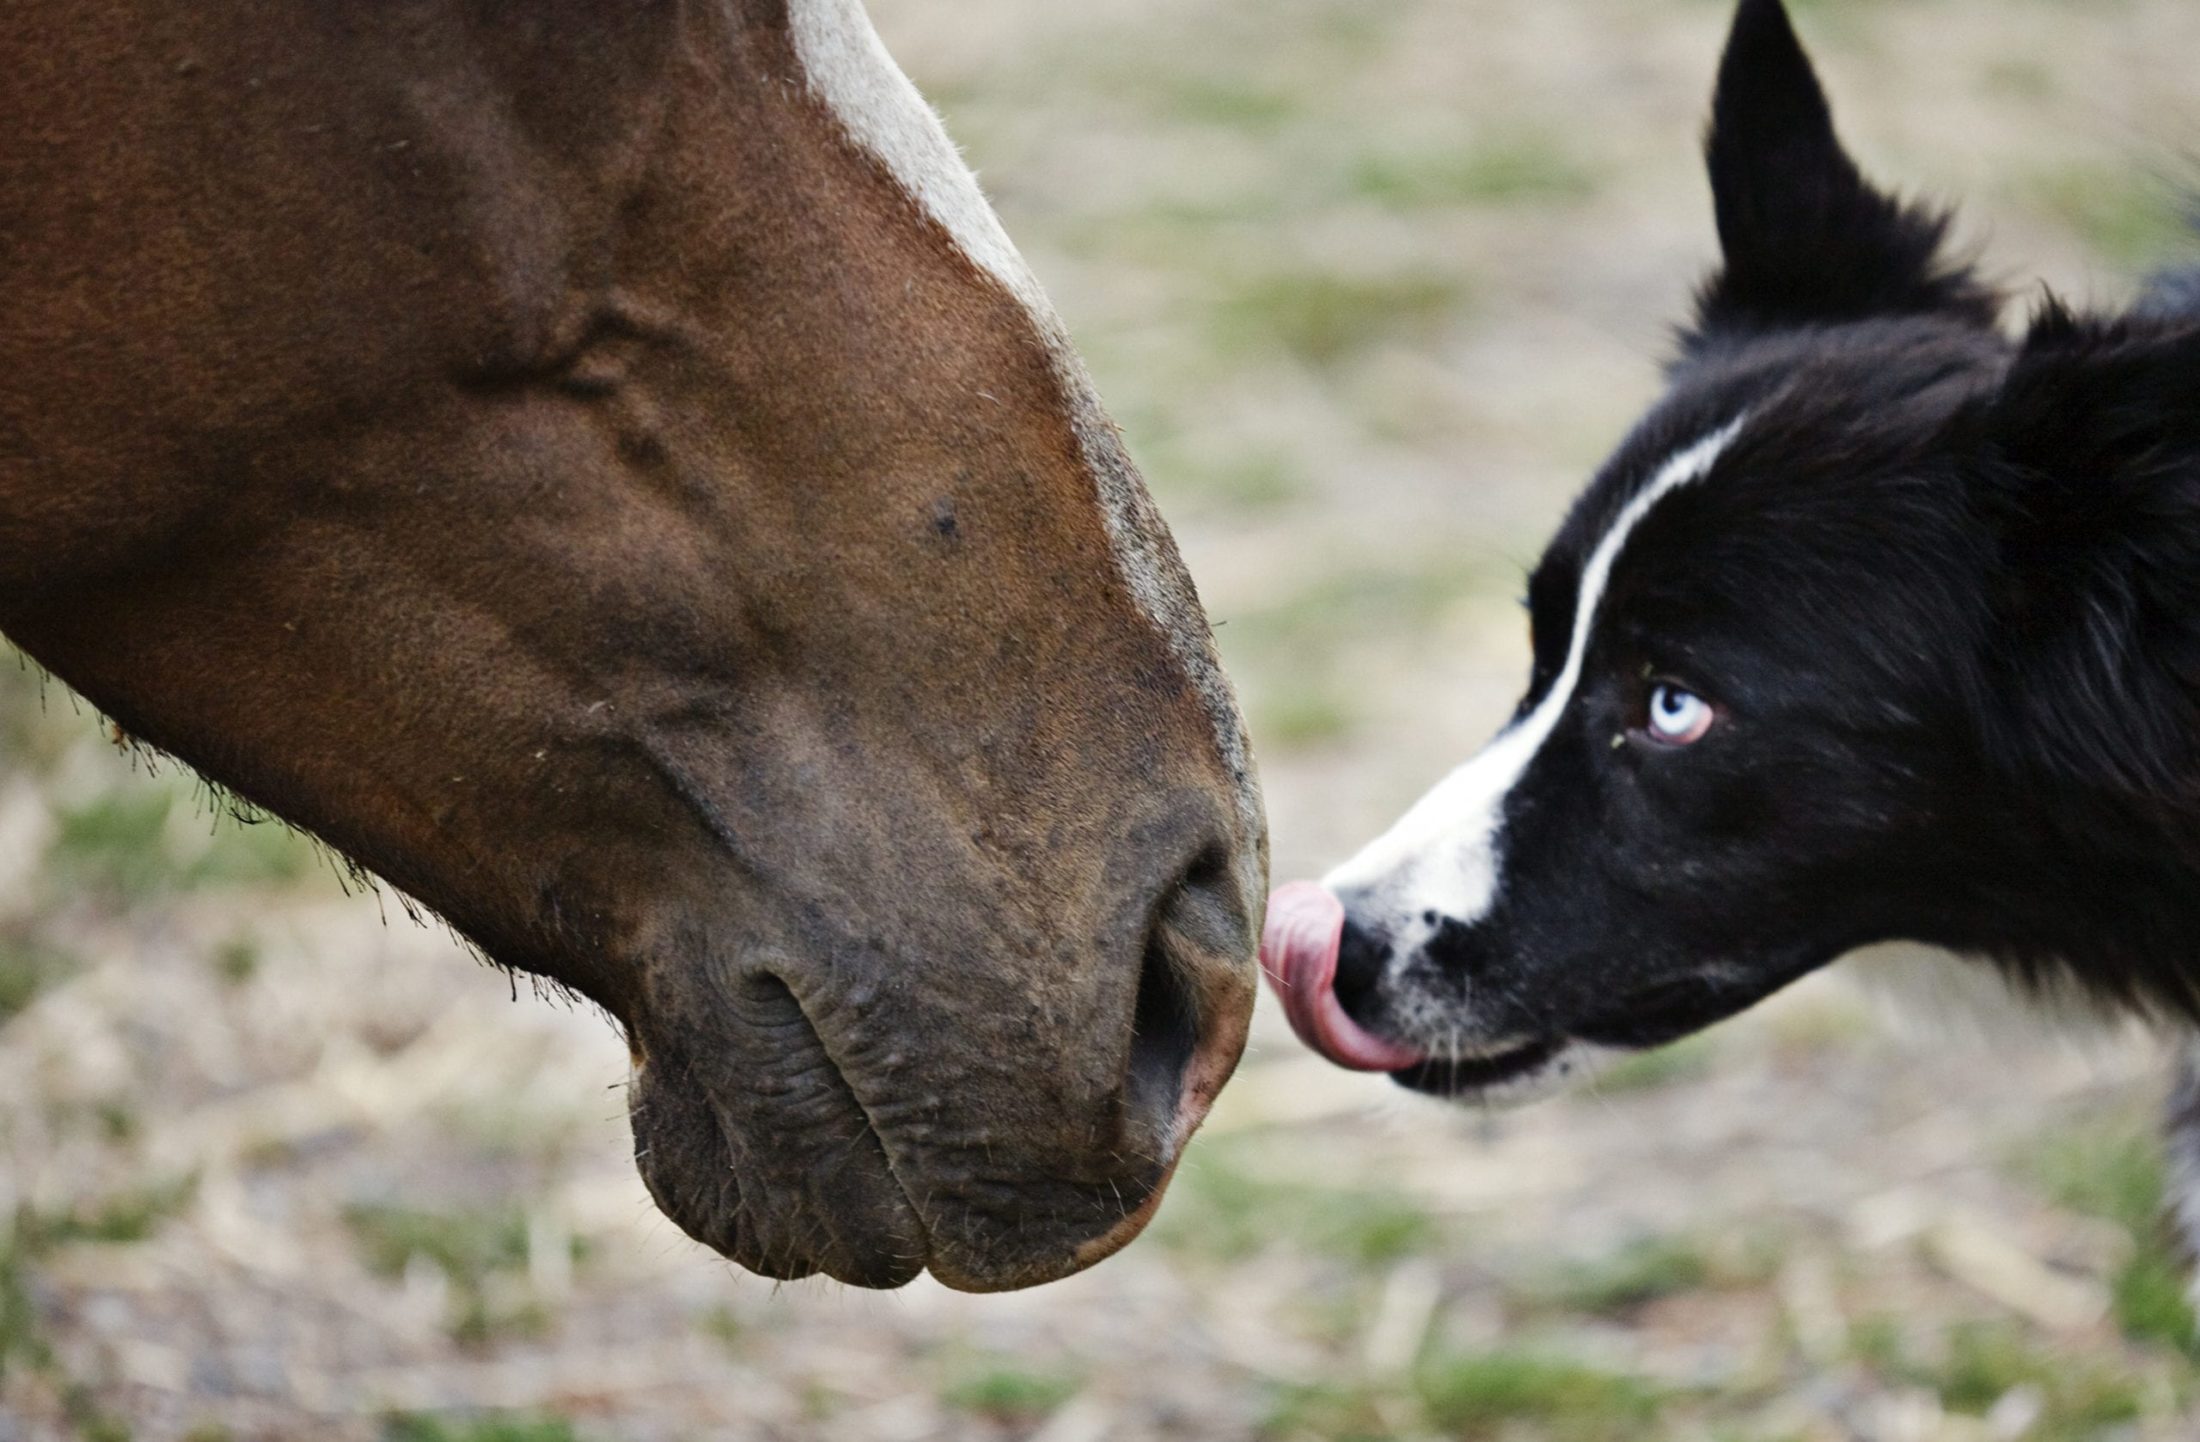 Close up shot of a black and white dog licking the nose of a brown horse.